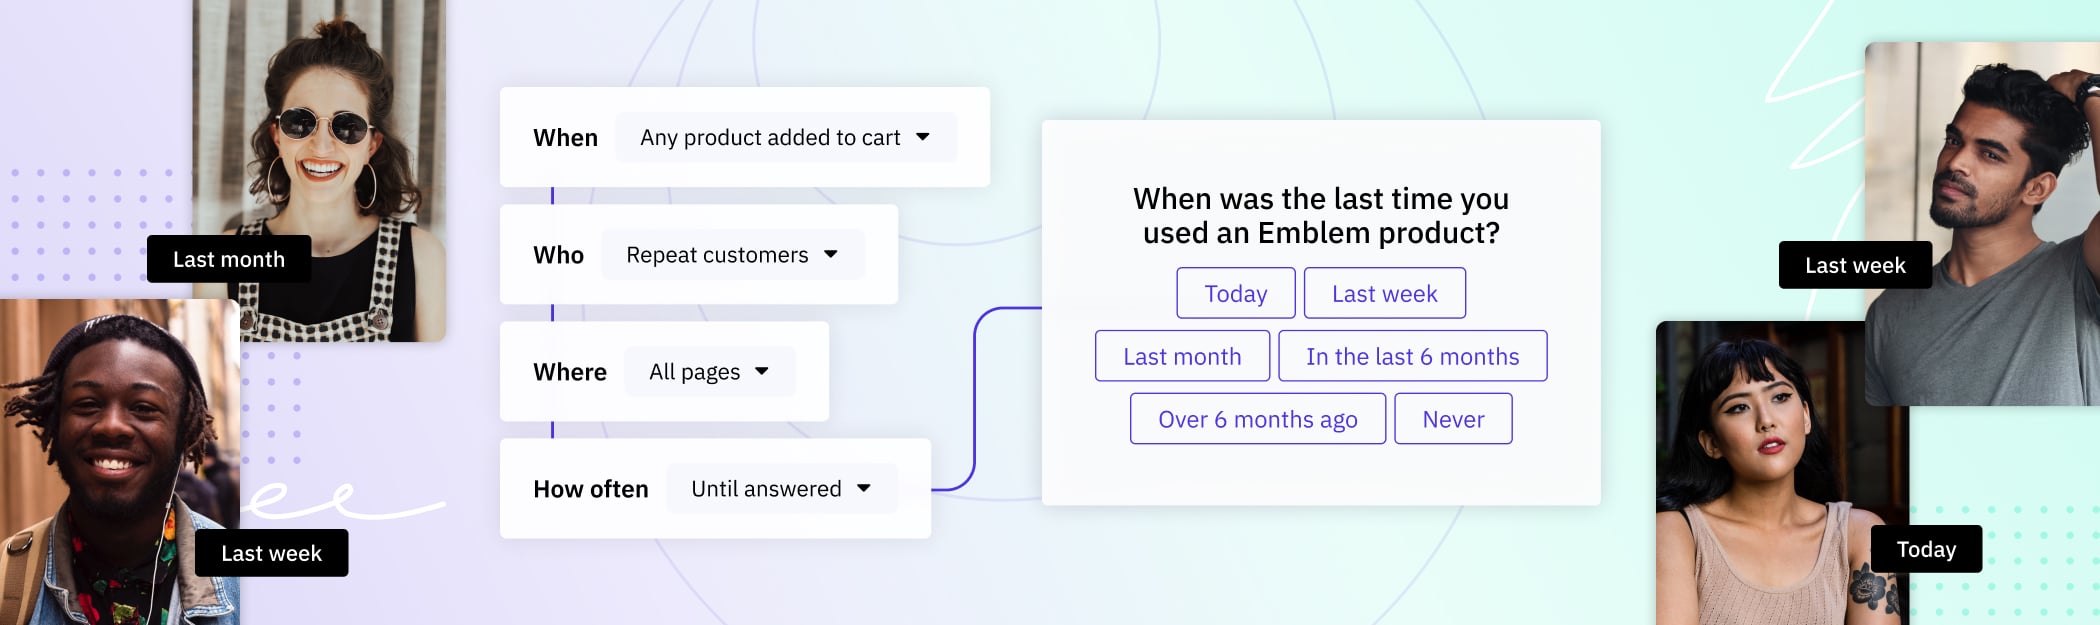 Contextual Targeting: How to Target Your Surveys to the Right Customer at the Right Time